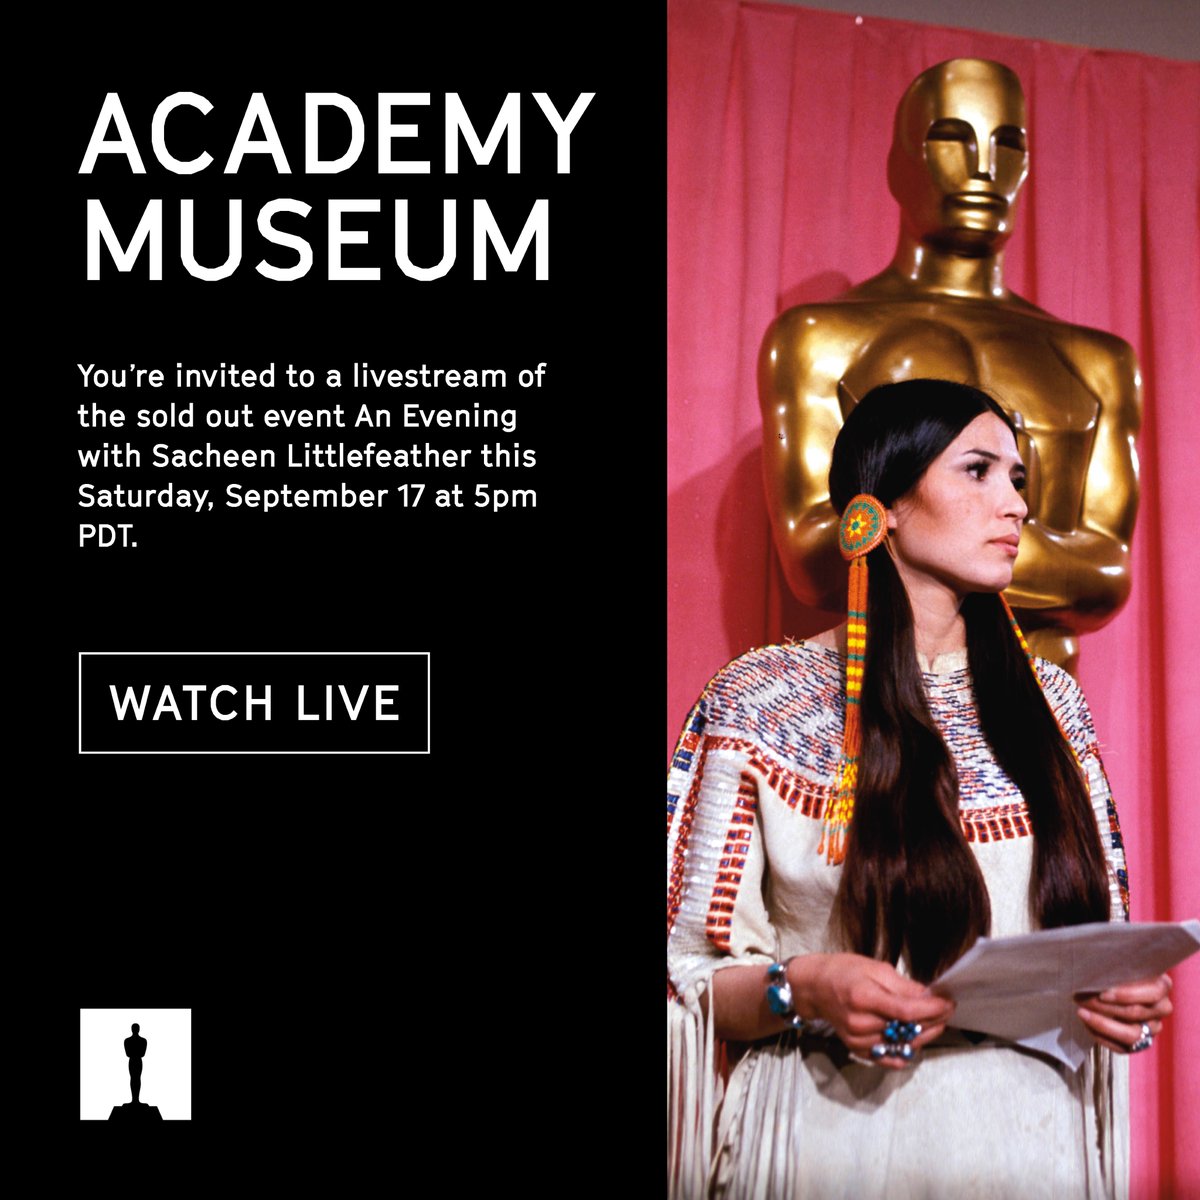 Join the @AcademyMuseum's 'An Evening with Sacheen Littlefeather' livestream for a special celebration of live Native American performances including a long awaited statement of apology from the Academy. Watch here: youtu.be/wNHtImiC90o